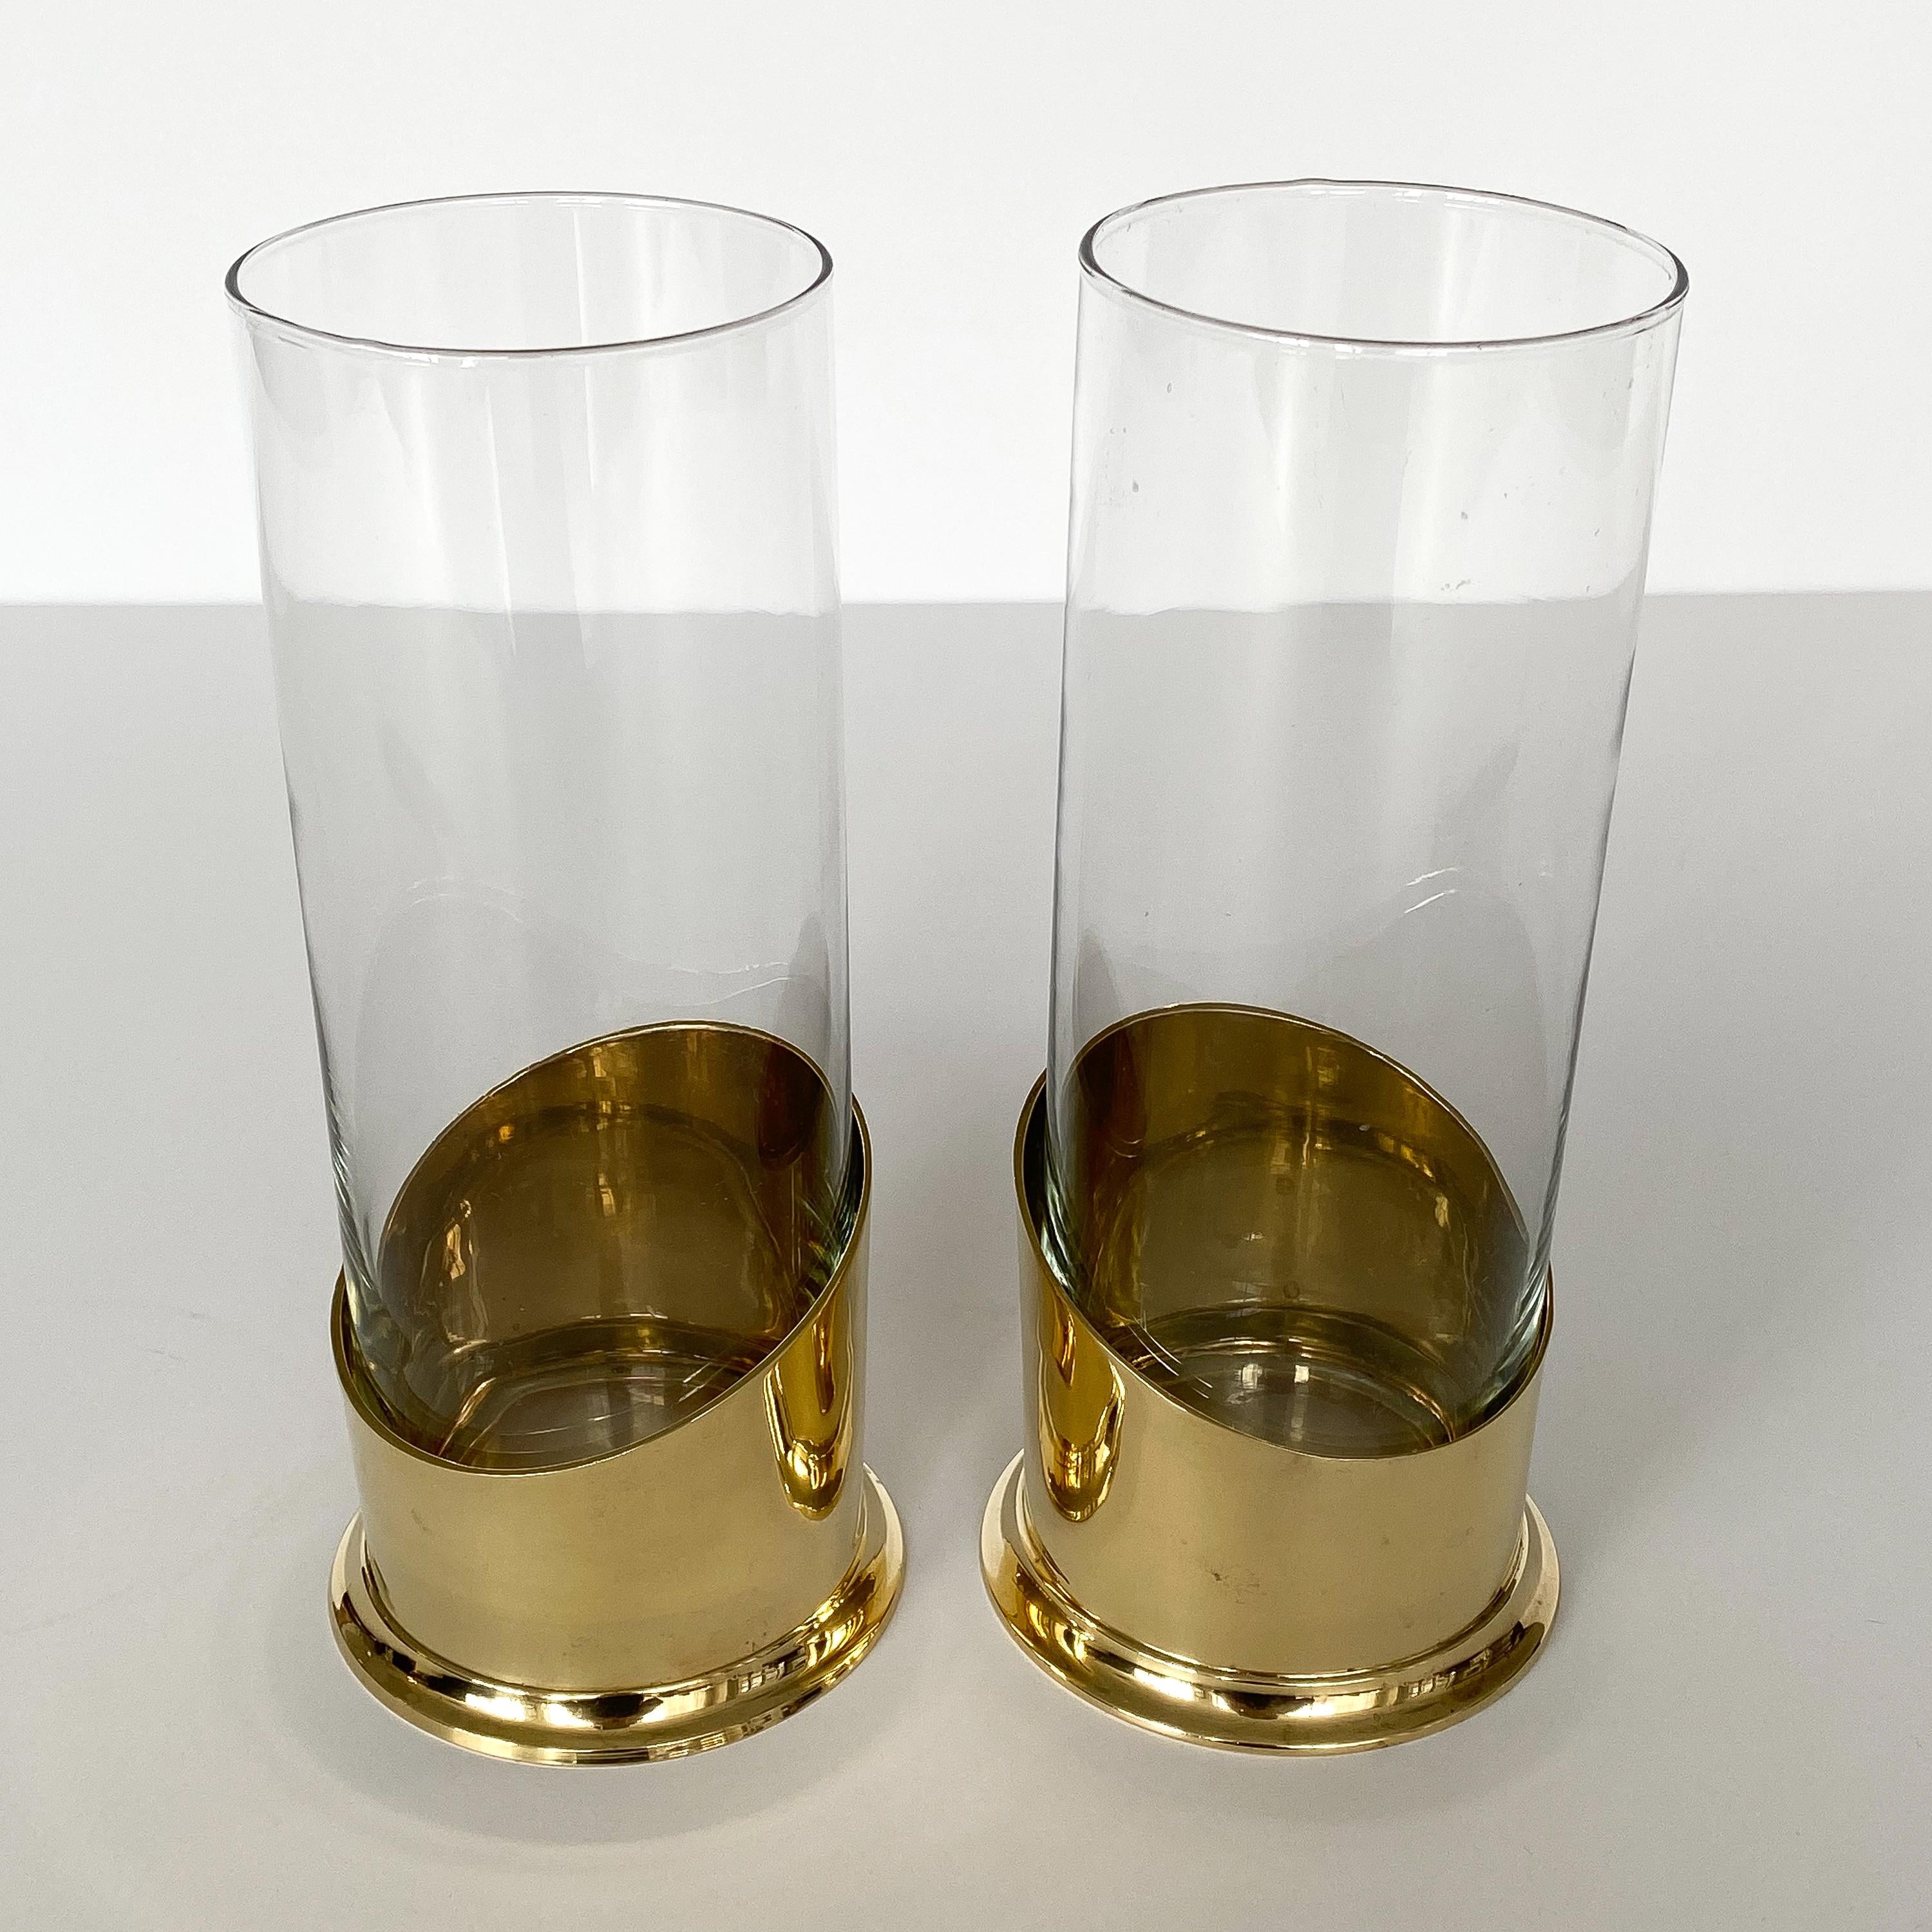 Pair of Brass and Glass Hurricane Candleholders / Vases 1